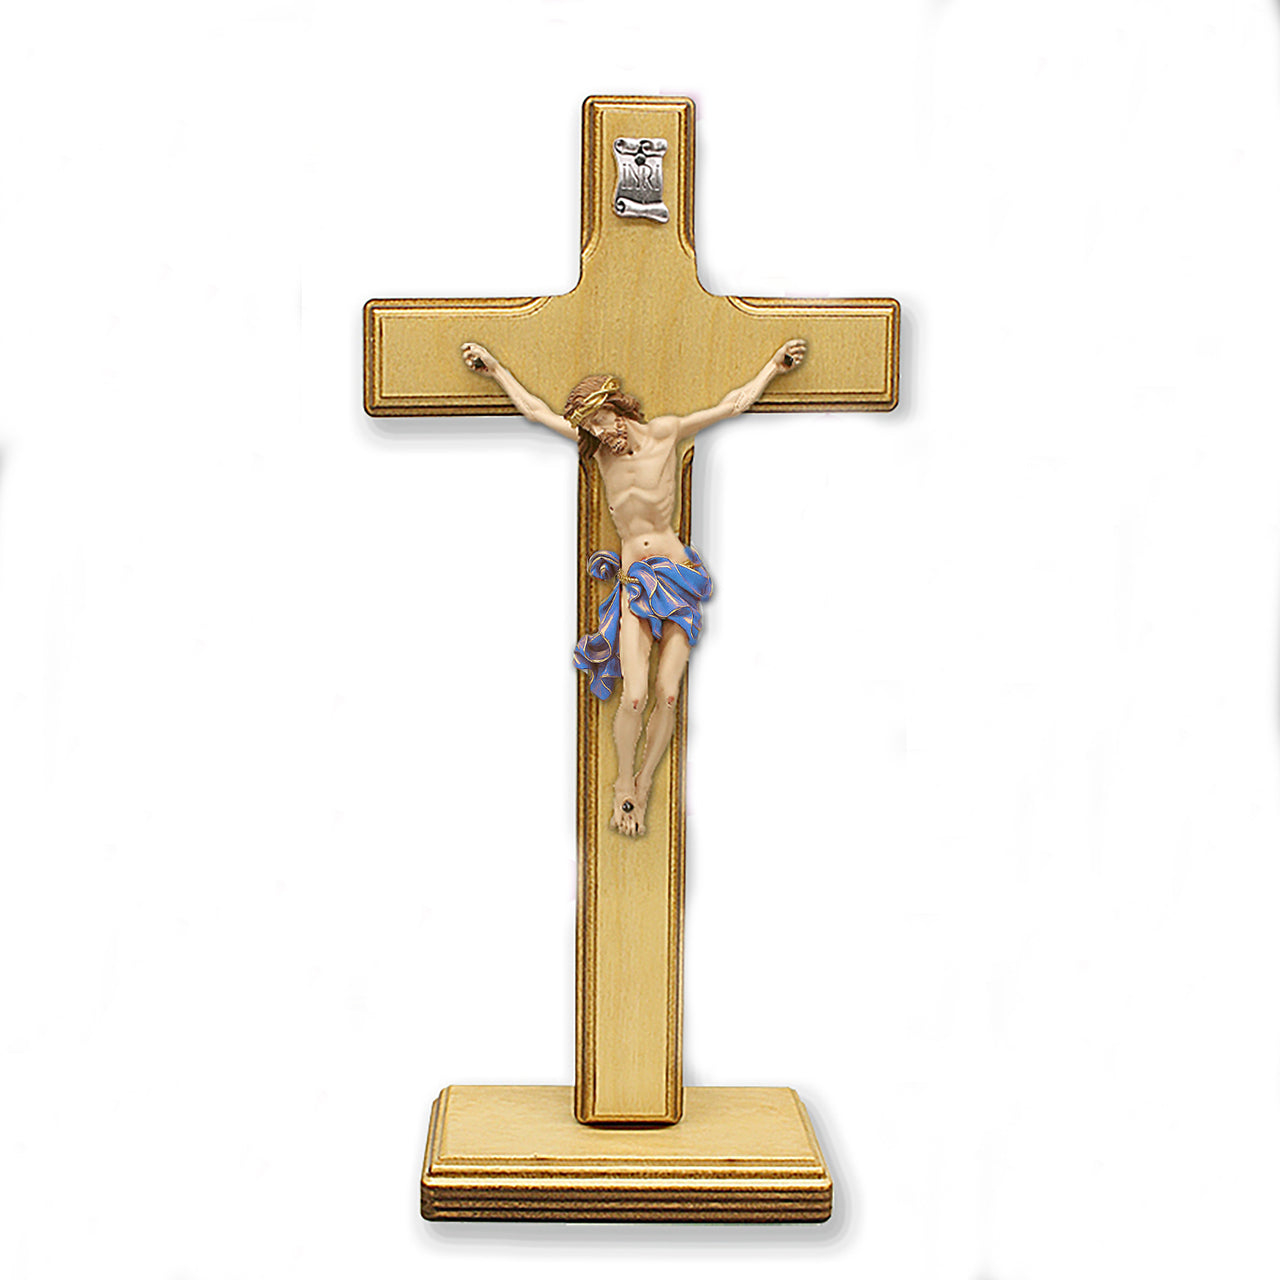 Light- Wood Cross with Blue Painted Corpus on Base